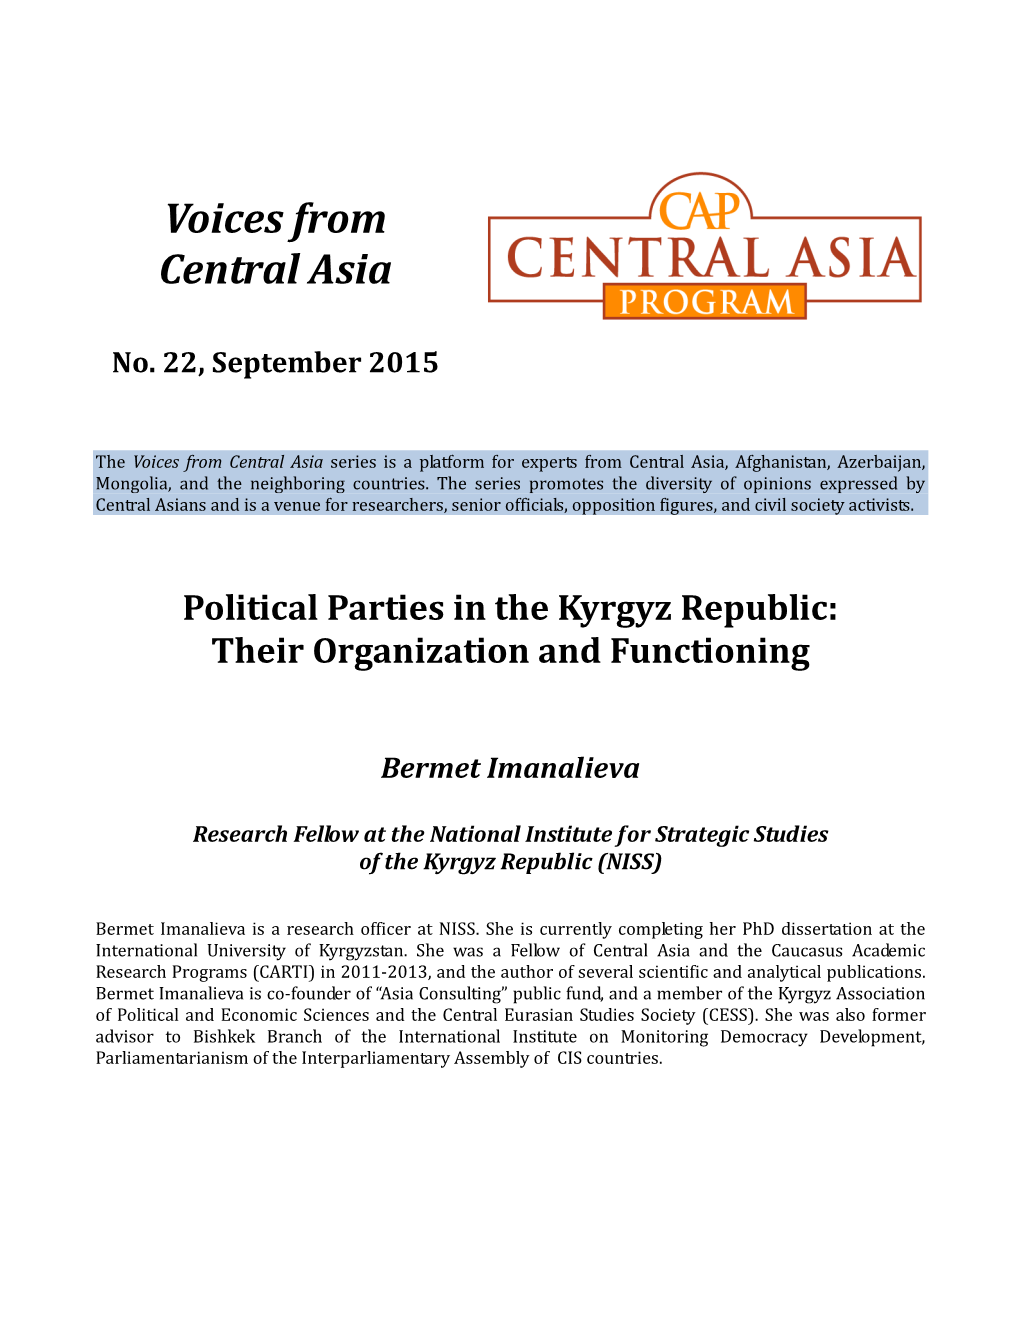 Voices from Central Asia